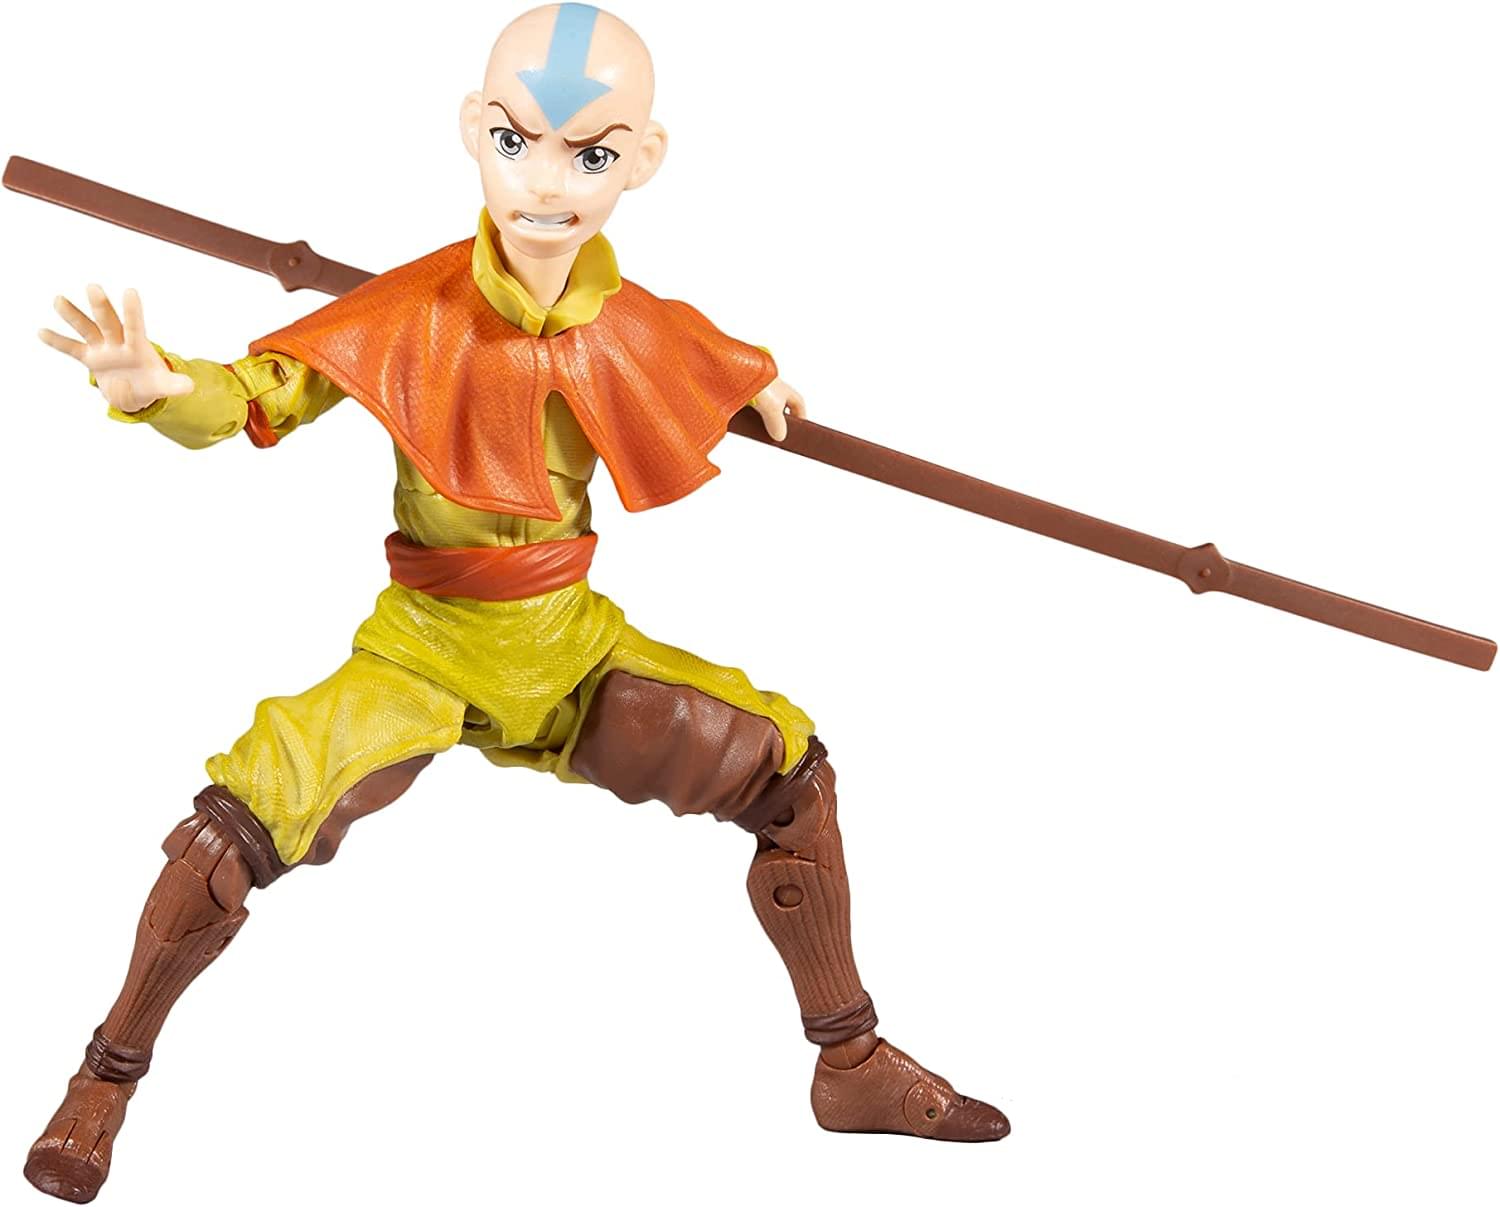 Avatar: The Last Airbender 7 Inch Action Figure | Aang